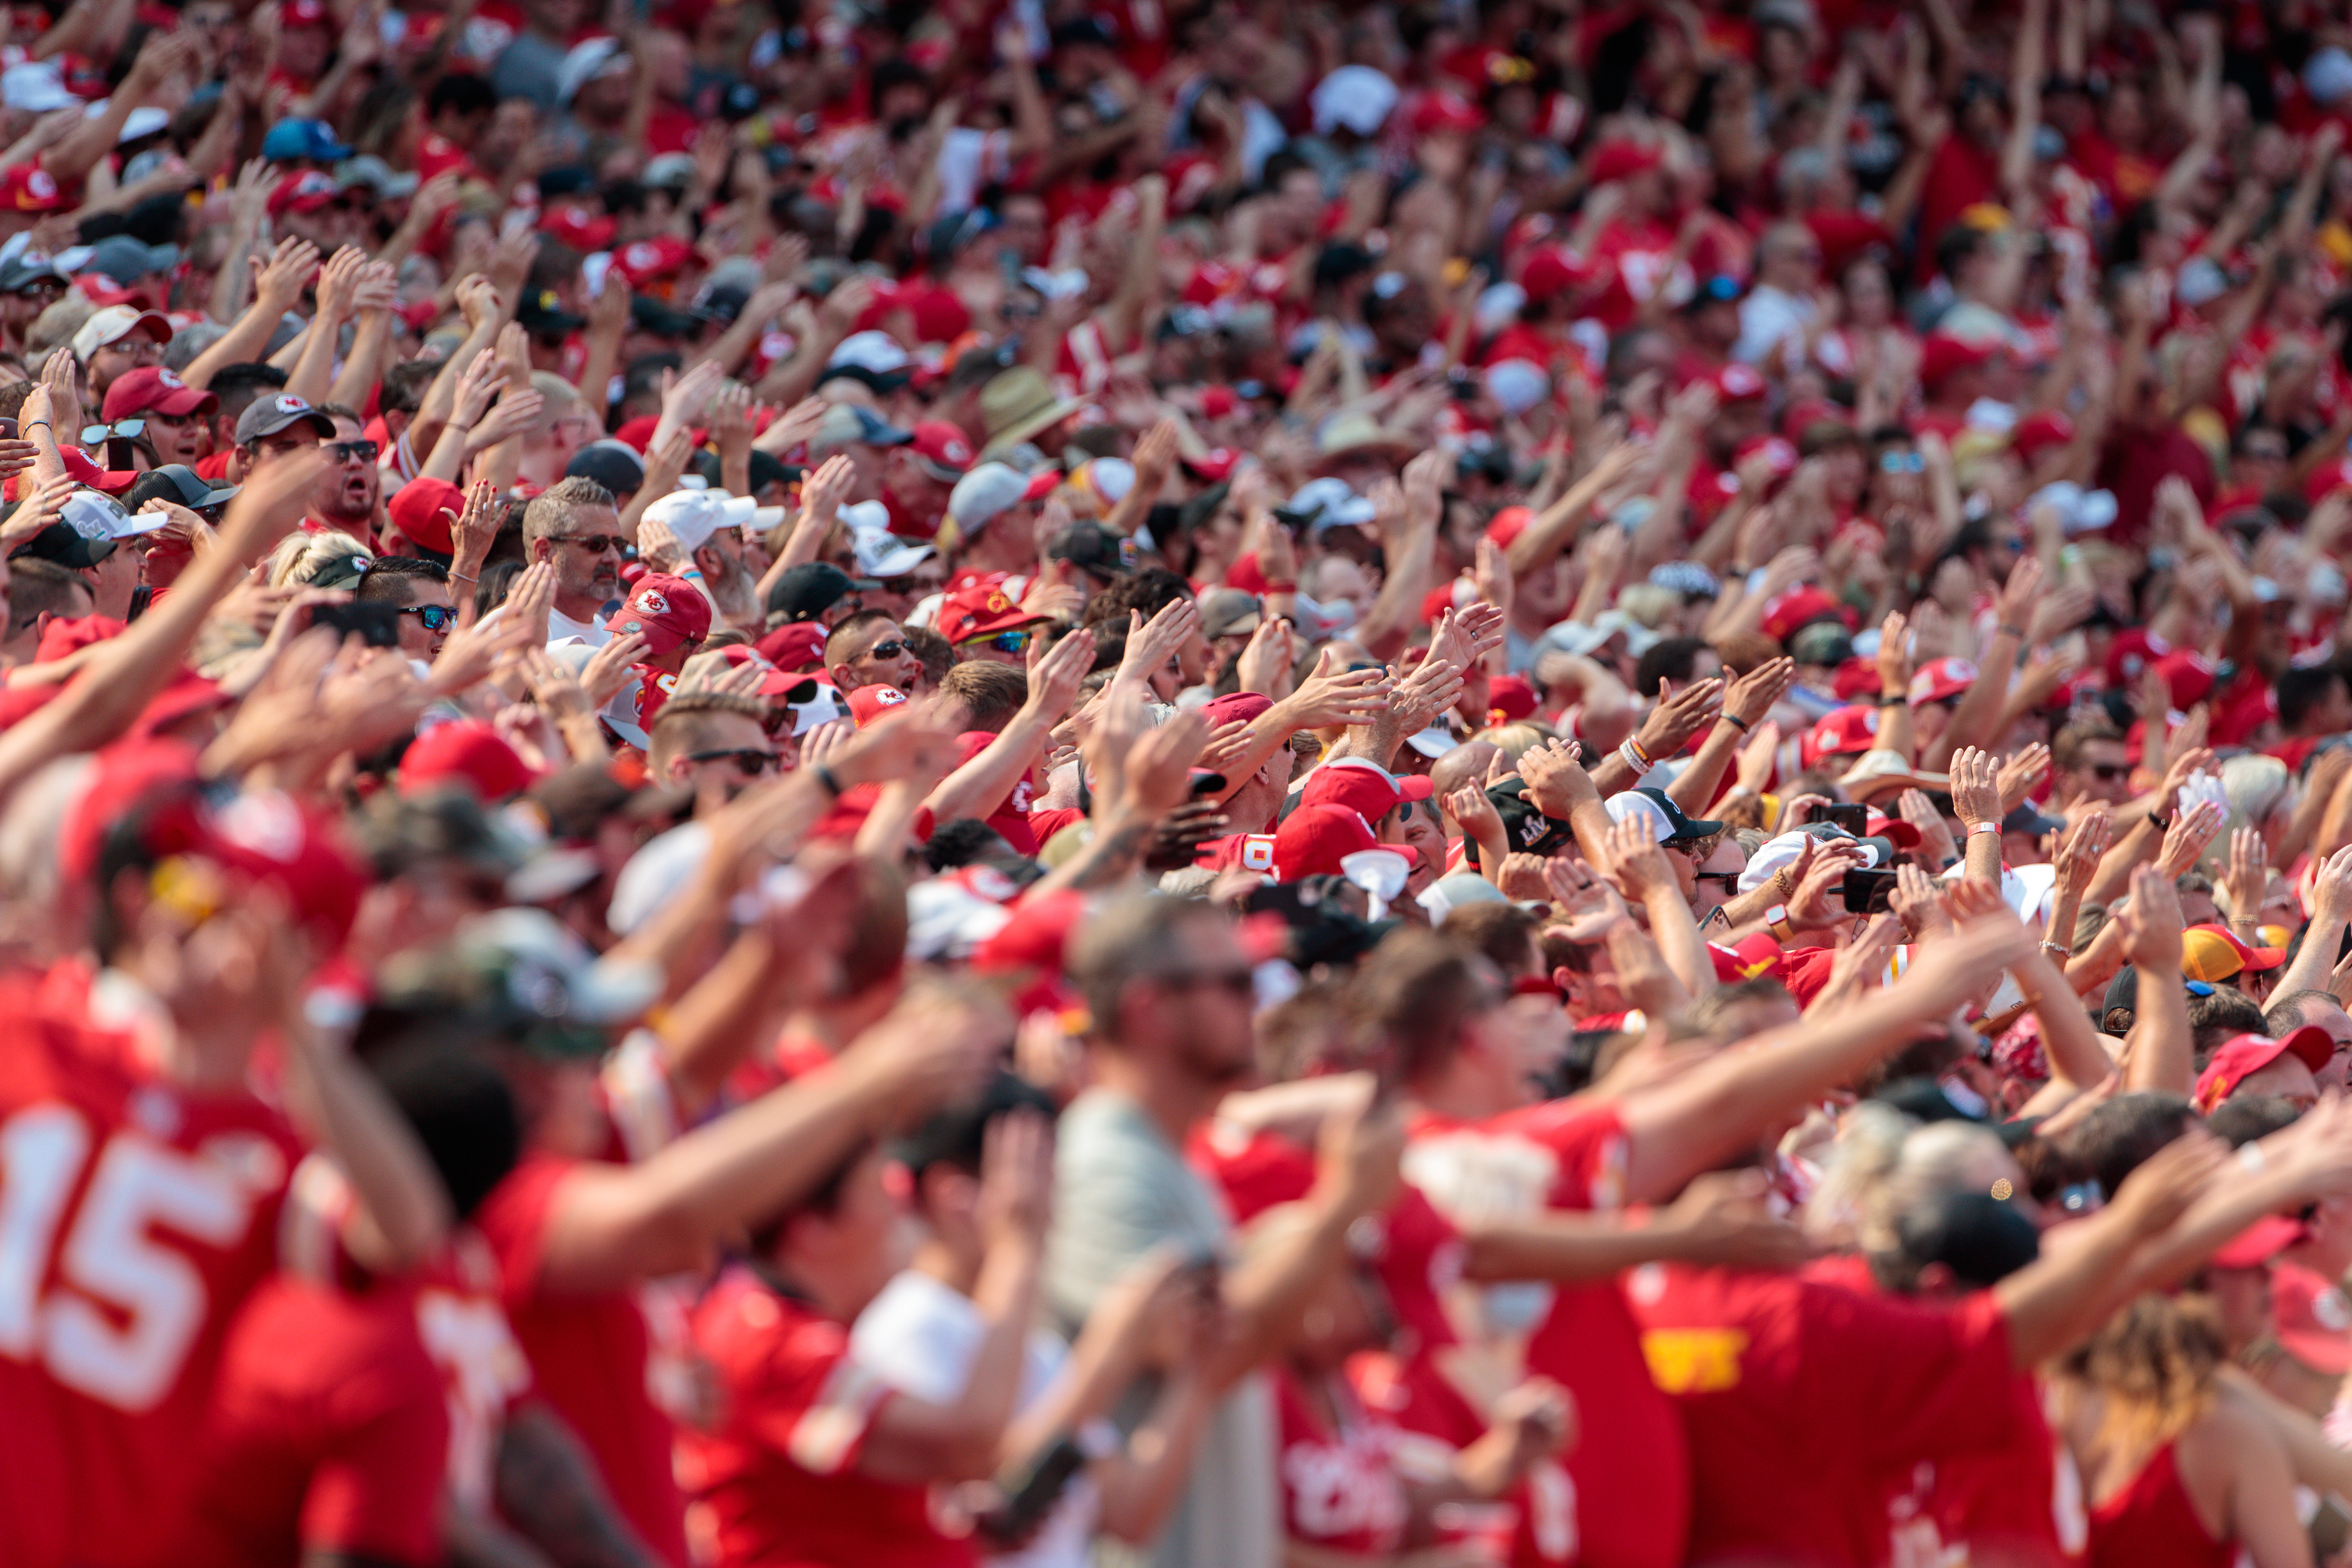 Chiefs fans with their arms raised